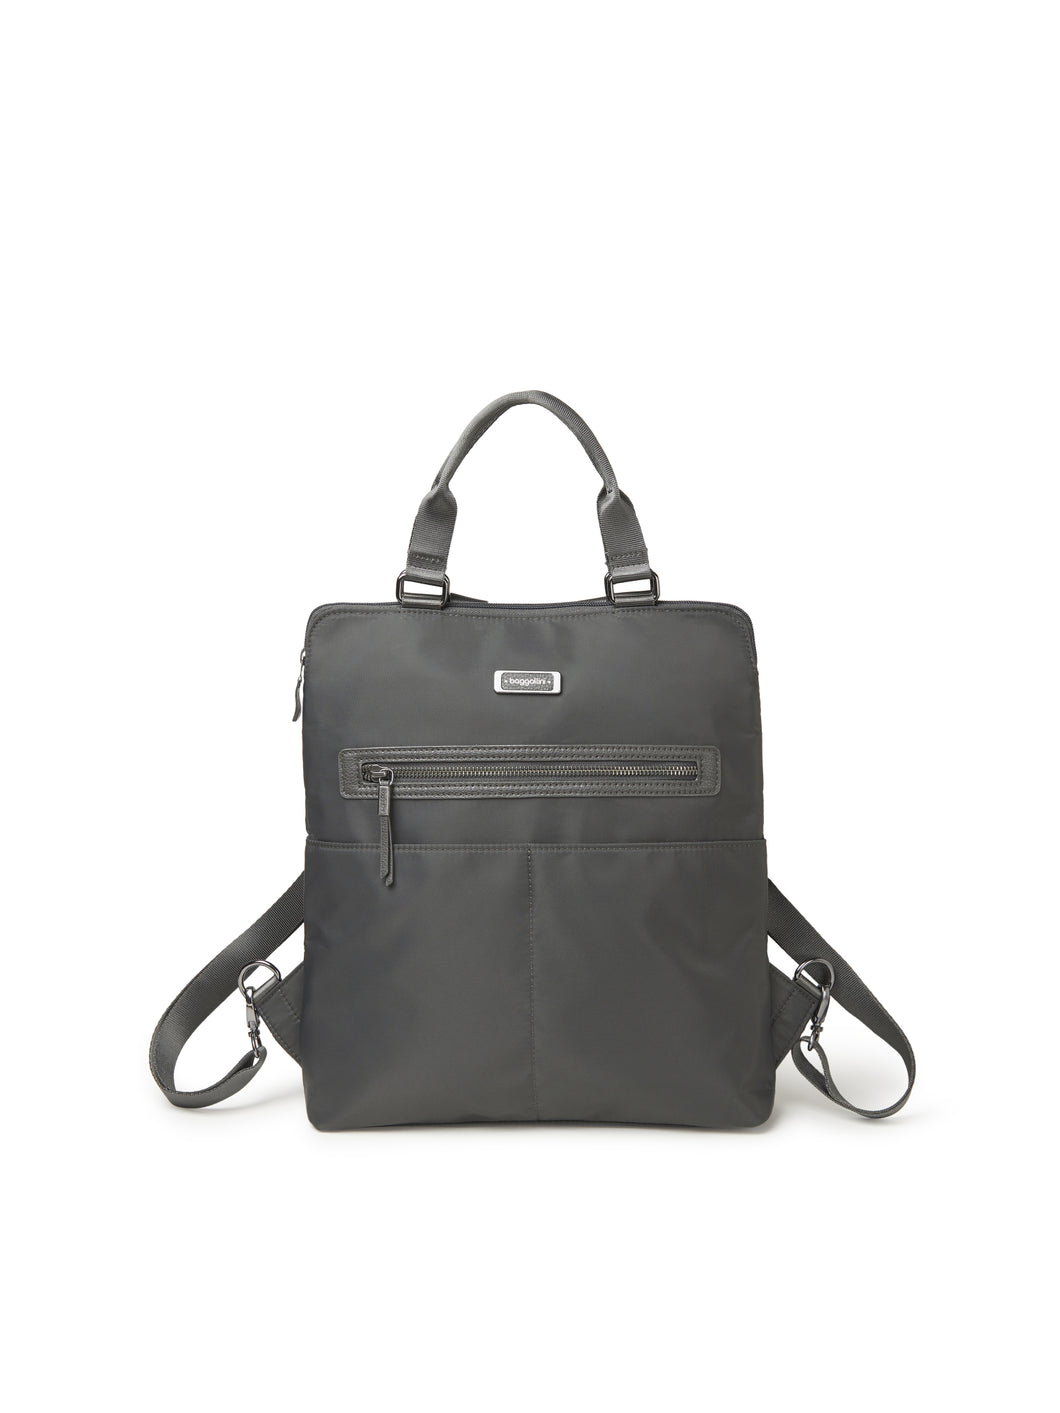 Jessica Convertible Tote Backpack